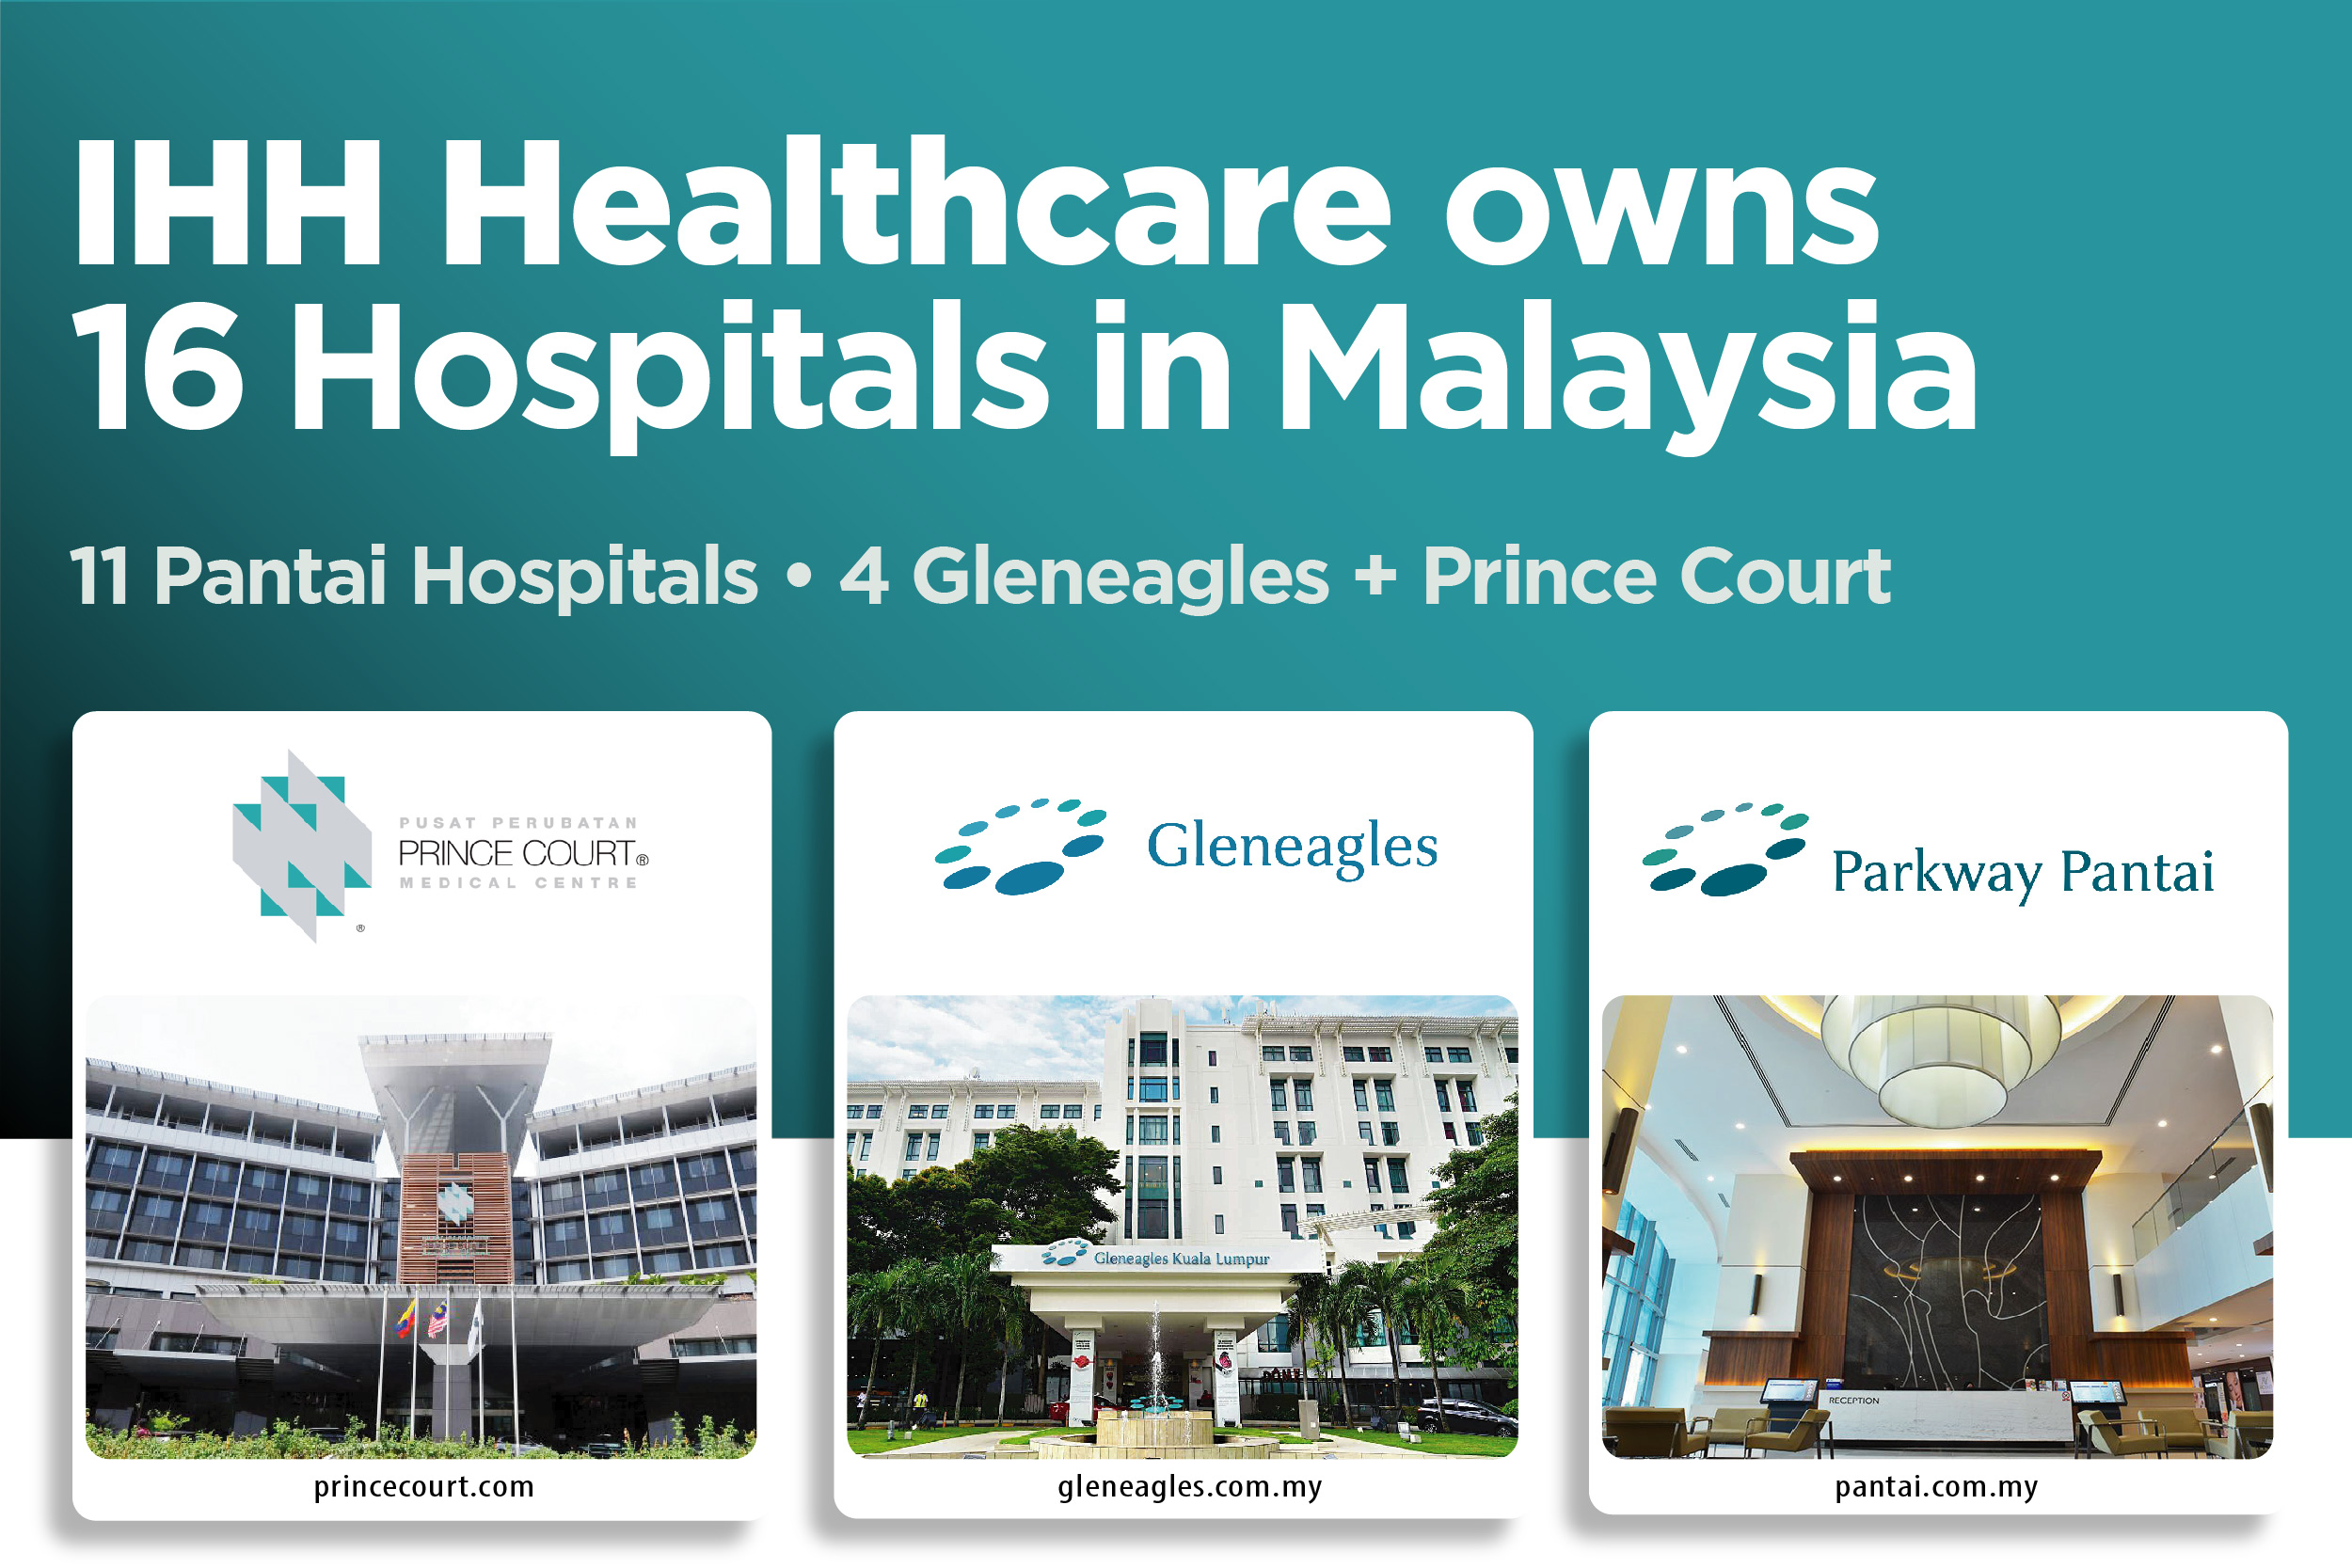 Will KHAZANAH Sell its 26% Stake in IHH Healthcare?